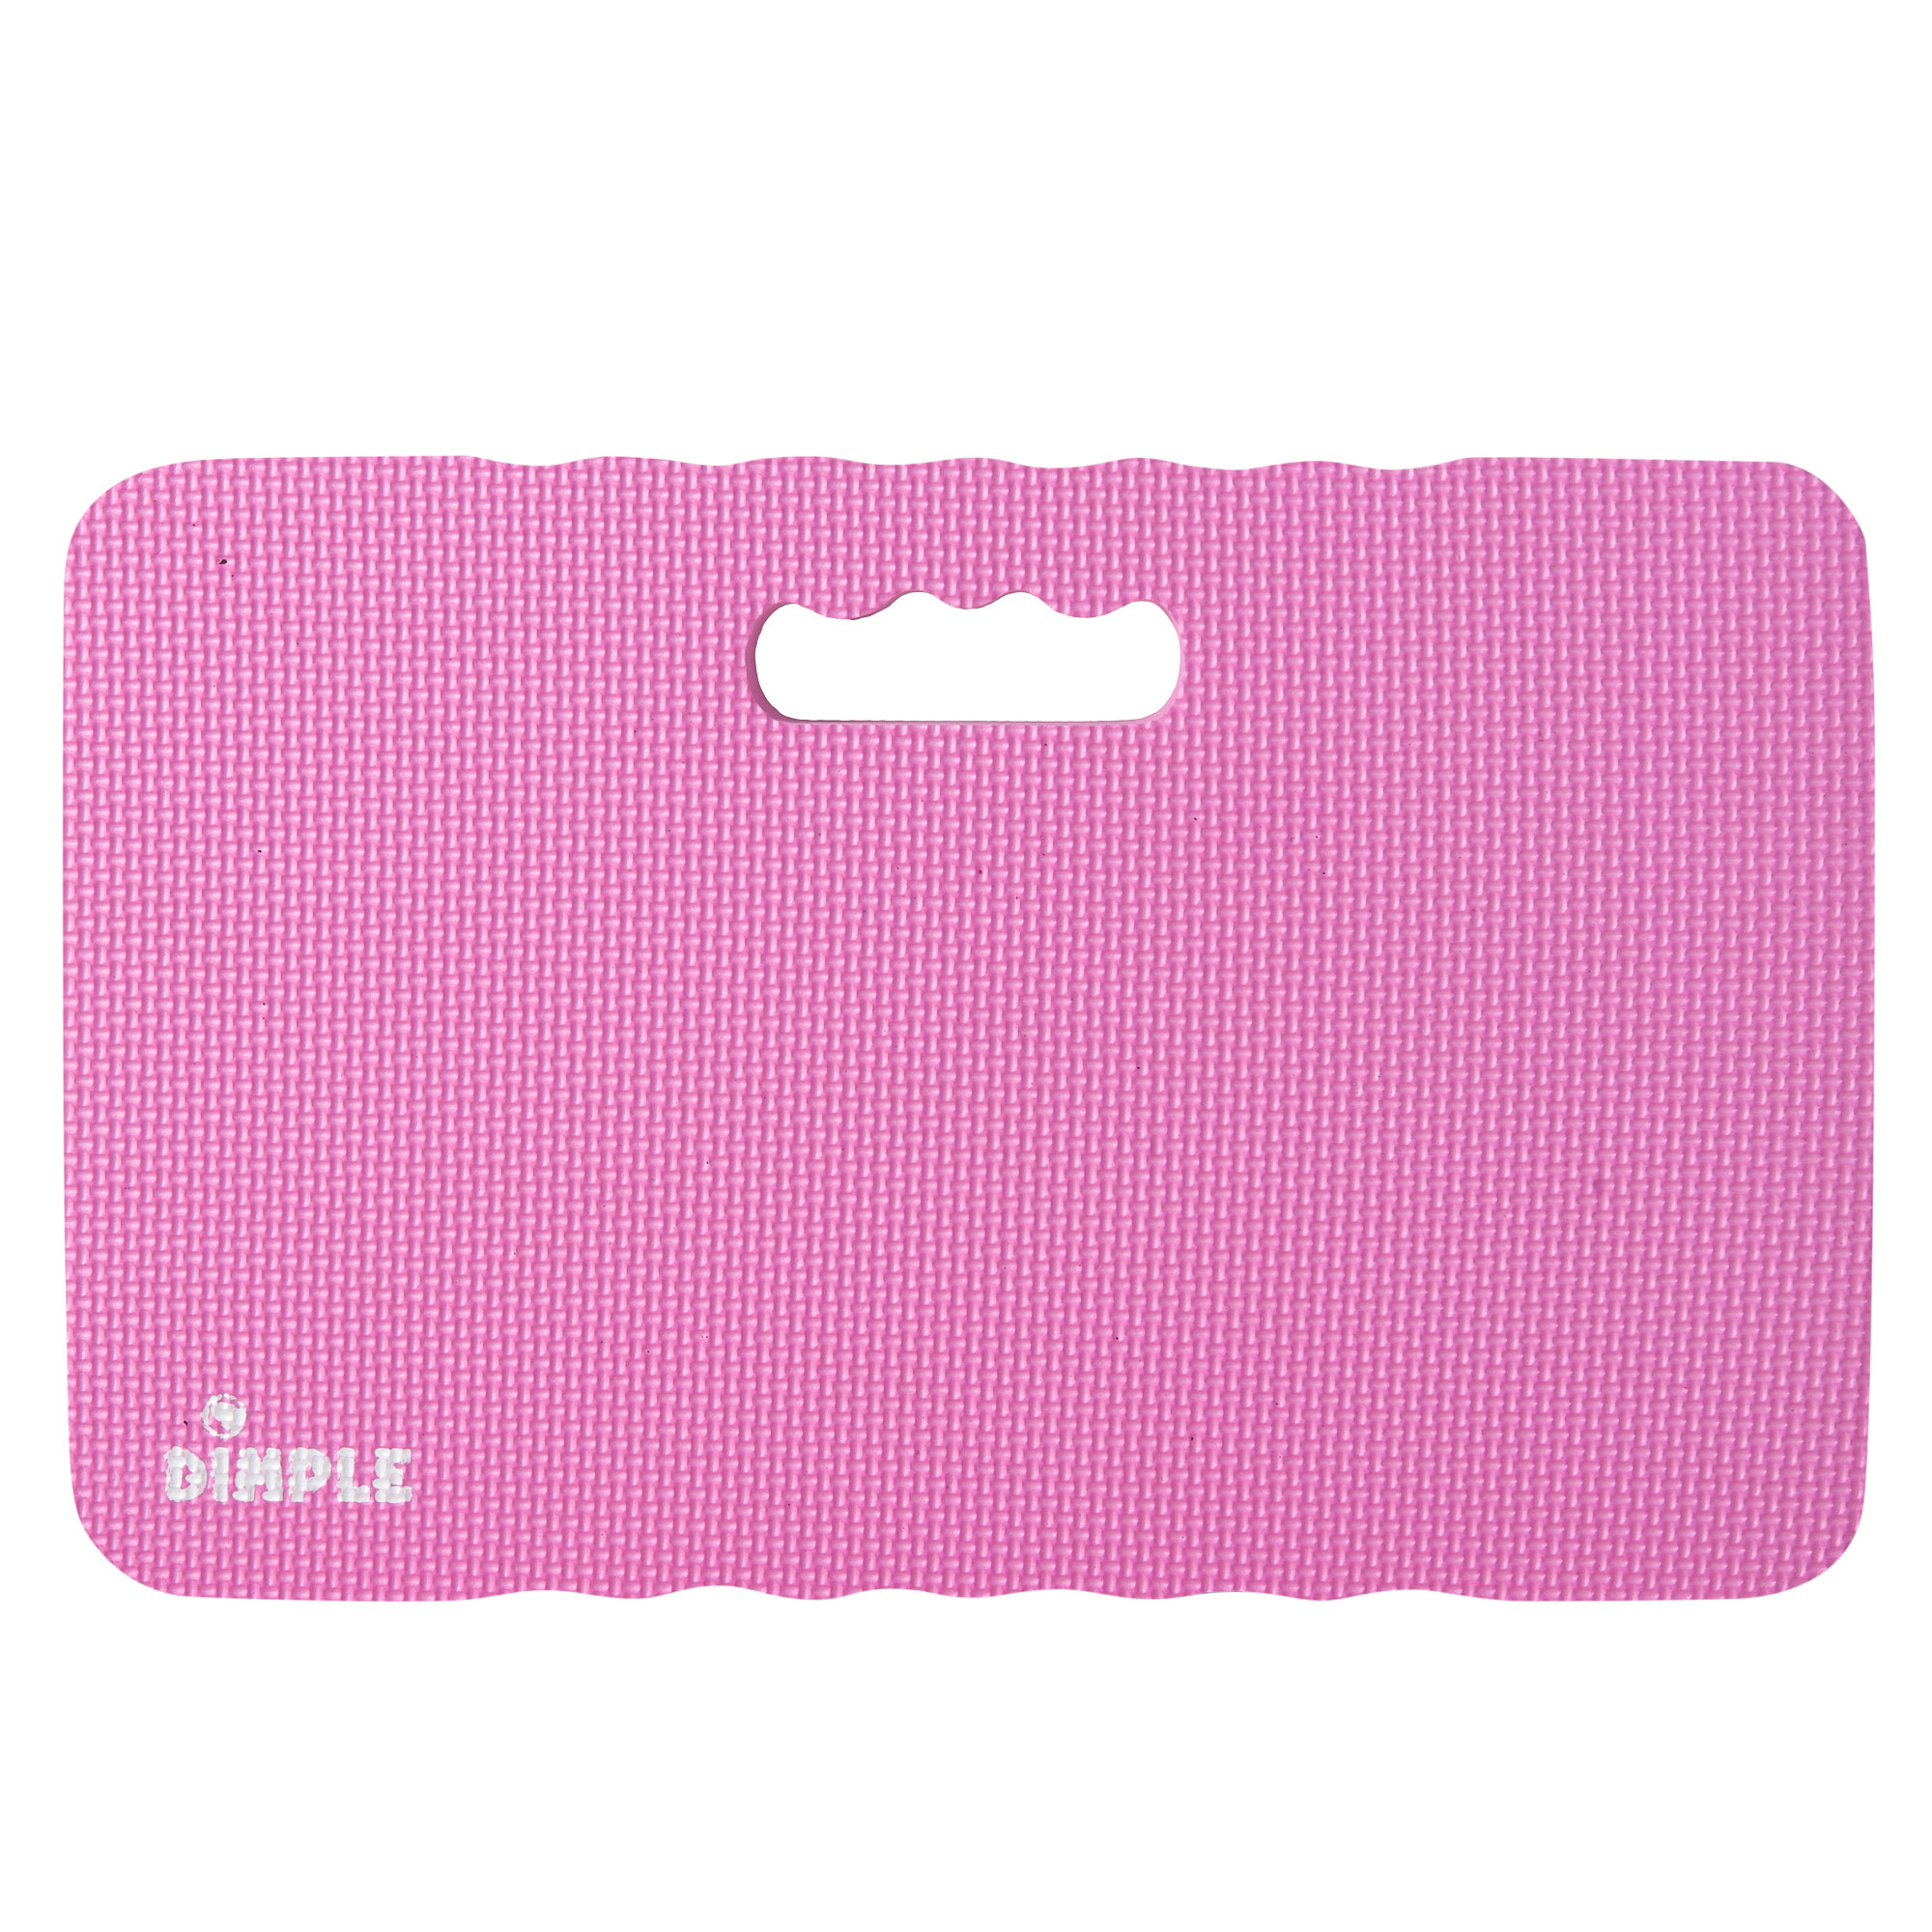 Dimple High Density 1.5 Thick Foam Comfort Kneeling Pad Mats For Gardening Knee Support, Exercise, Yoga Mat, Garden Cushions (Pink)